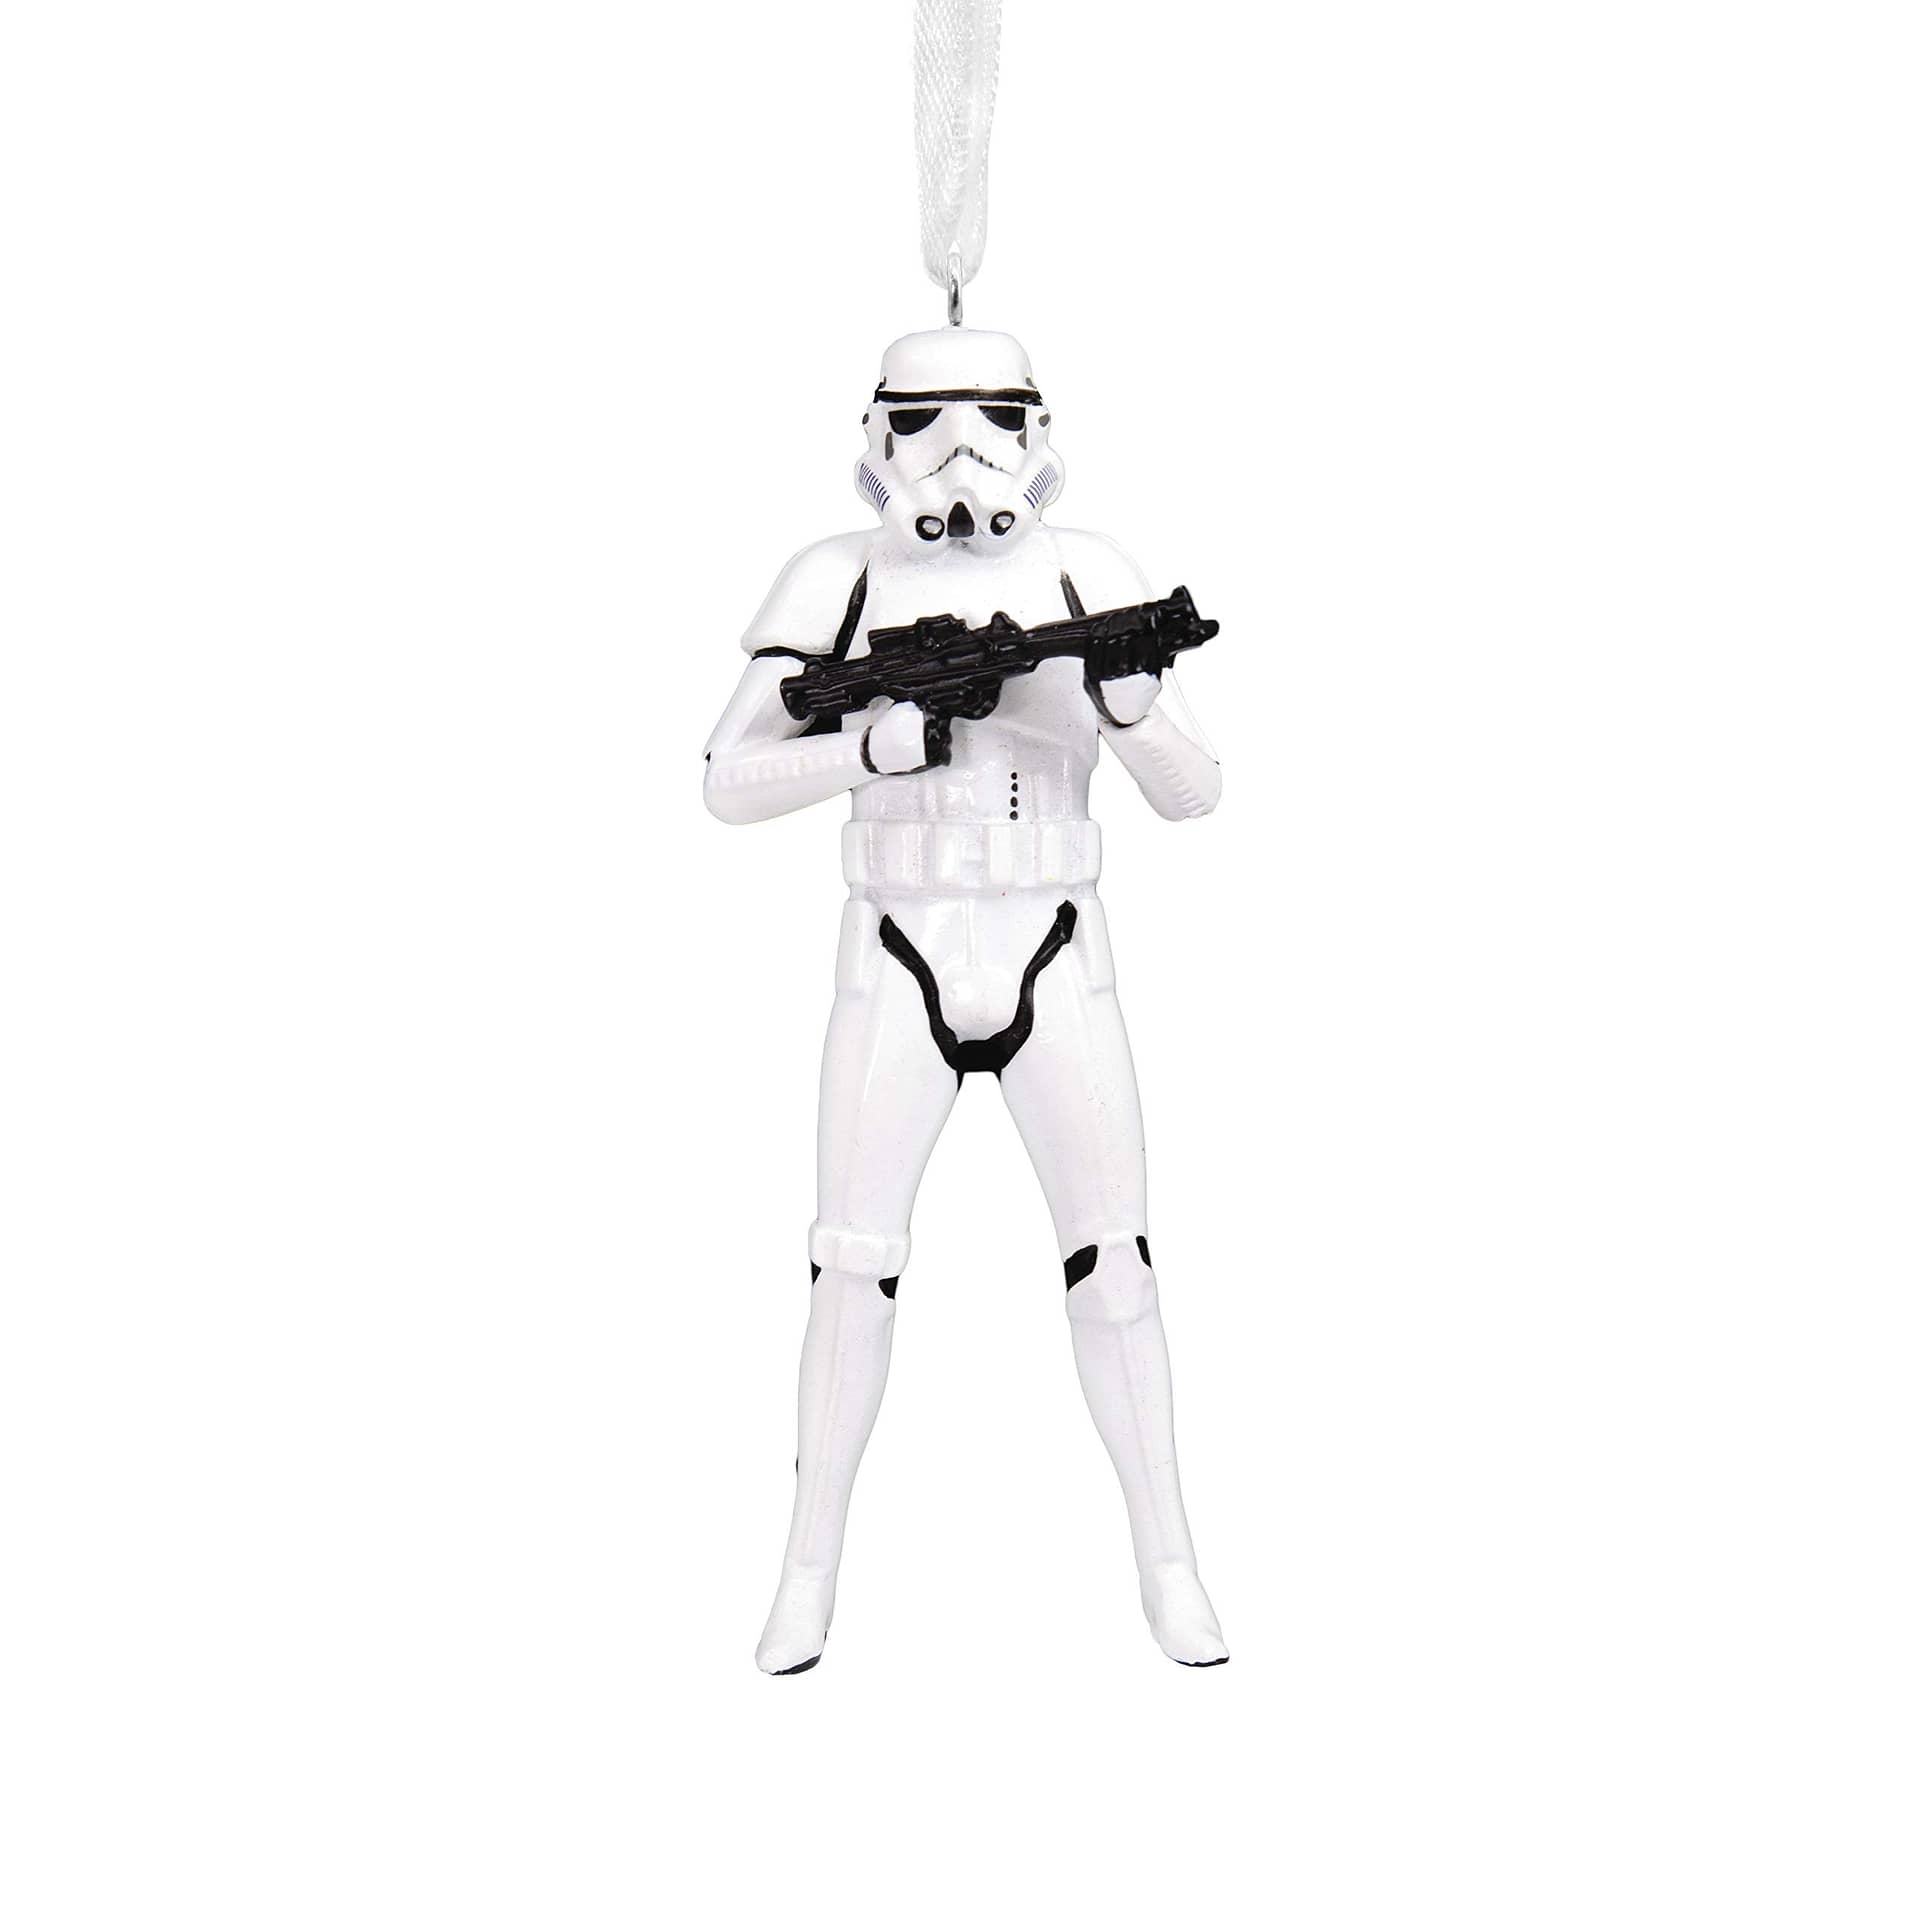 Christmas Star Wars Stormtrooper Ornament Personalized Gifts